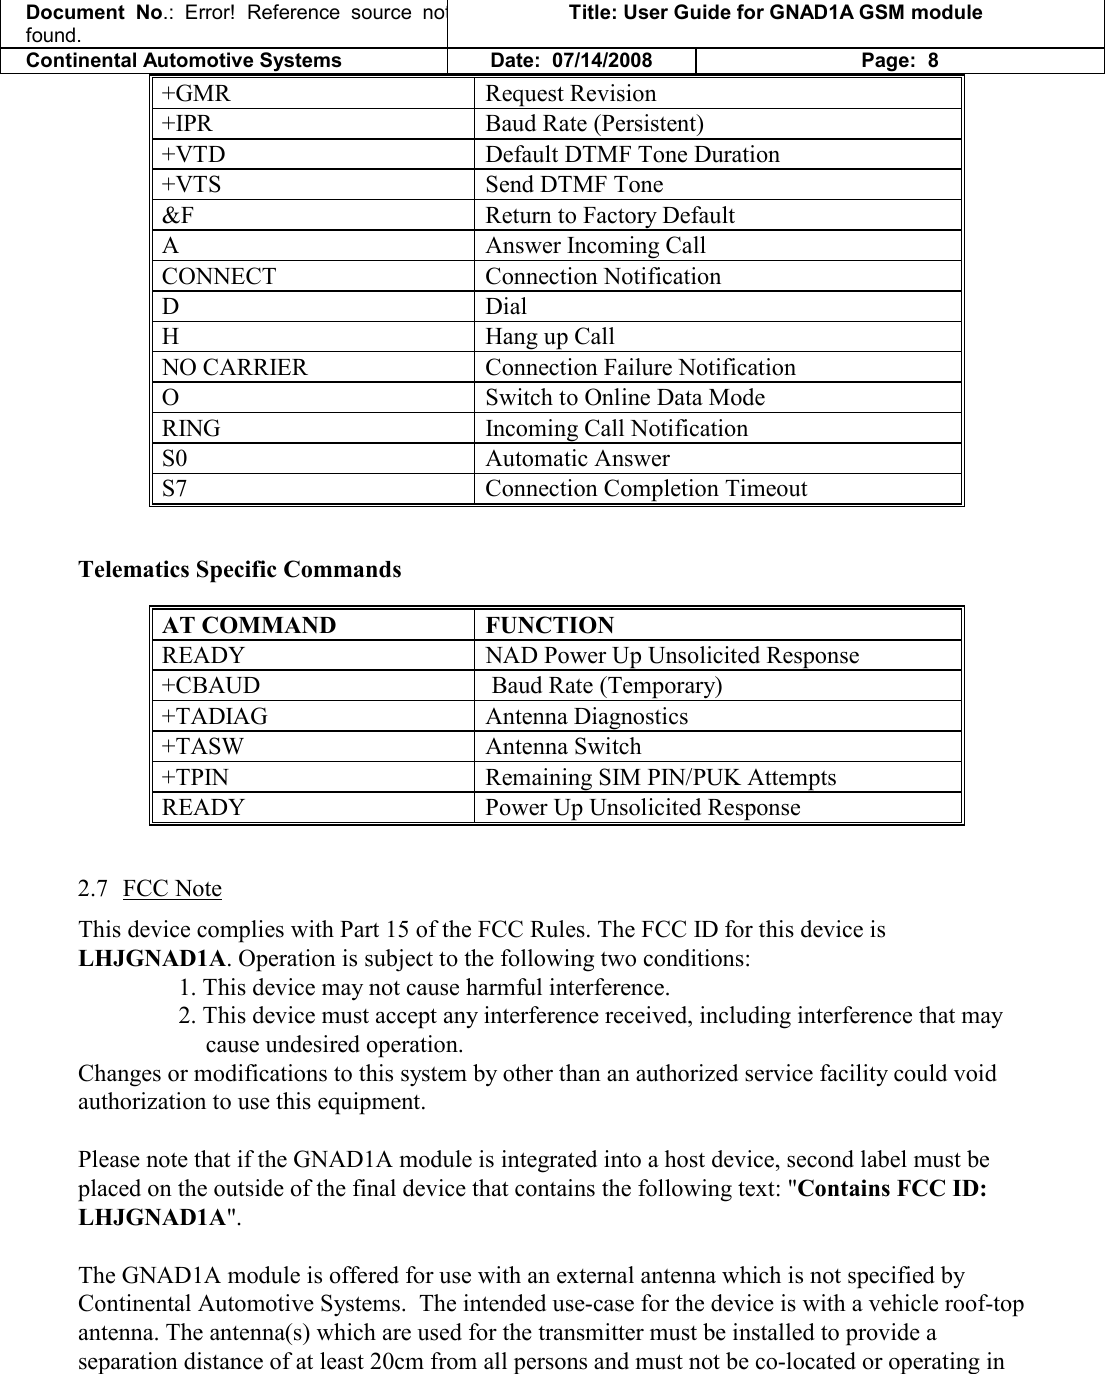 Document  No.: Error!  Reference  source  not found. Title: User Guide for GNAD1A GSM module Continental Automotive Systems Date:  07/14/2008 Page:  8 +GMR   Request Revision  +IPR   Baud Rate (Persistent)  +VTD   Default DTMF Tone Duration  +VTS   Send DTMF Tone  &amp;F   Return to Factory Default  A   Answer Incoming Call  CONNECT   Connection Notification  D   Dial  H   Hang up Call  NO CARRIER   Connection Failure Notification O   Switch to Online Data Mode  RING   Incoming Call Notification  S0   Automatic Answer  S7   Connection Completion Timeout   Telematics Specific Commands  AT COMMAND  FUNCTION READY   NAD Power Up Unsolicited Response +CBAUD   Baud Rate (Temporary) +TADIAG   Antenna Diagnostics +TASW   Antenna Switch +TPIN   Remaining SIM PIN/PUK Attempts READY   Power Up Unsolicited Response  2.7 FCC Note This device complies with Part 15 of the FCC Rules. The FCC ID for this device is LHJGNAD1A. Operation is subject to the following two conditions: 1. This device may not cause harmful interference. 2. This device must accept any interference received, including interference that may cause undesired operation. Changes or modifications to this system by other than an authorized service facility could void authorization to use this equipment.  Please note that if the GNAD1A module is integrated into a host device, second label must be placed on the outside of the final device that contains the following text: &quot;Contains FCC ID: LHJGNAD1A&quot;.  The GNAD1A module is offered for use with an external antenna which is not specified by Continental Automotive Systems.  The intended use-case for the device is with a vehicle roof-top antenna. The antenna(s) which are used for the transmitter must be installed to provide a separation distance of at least 20cm from all persons and must not be co-located or operating in 